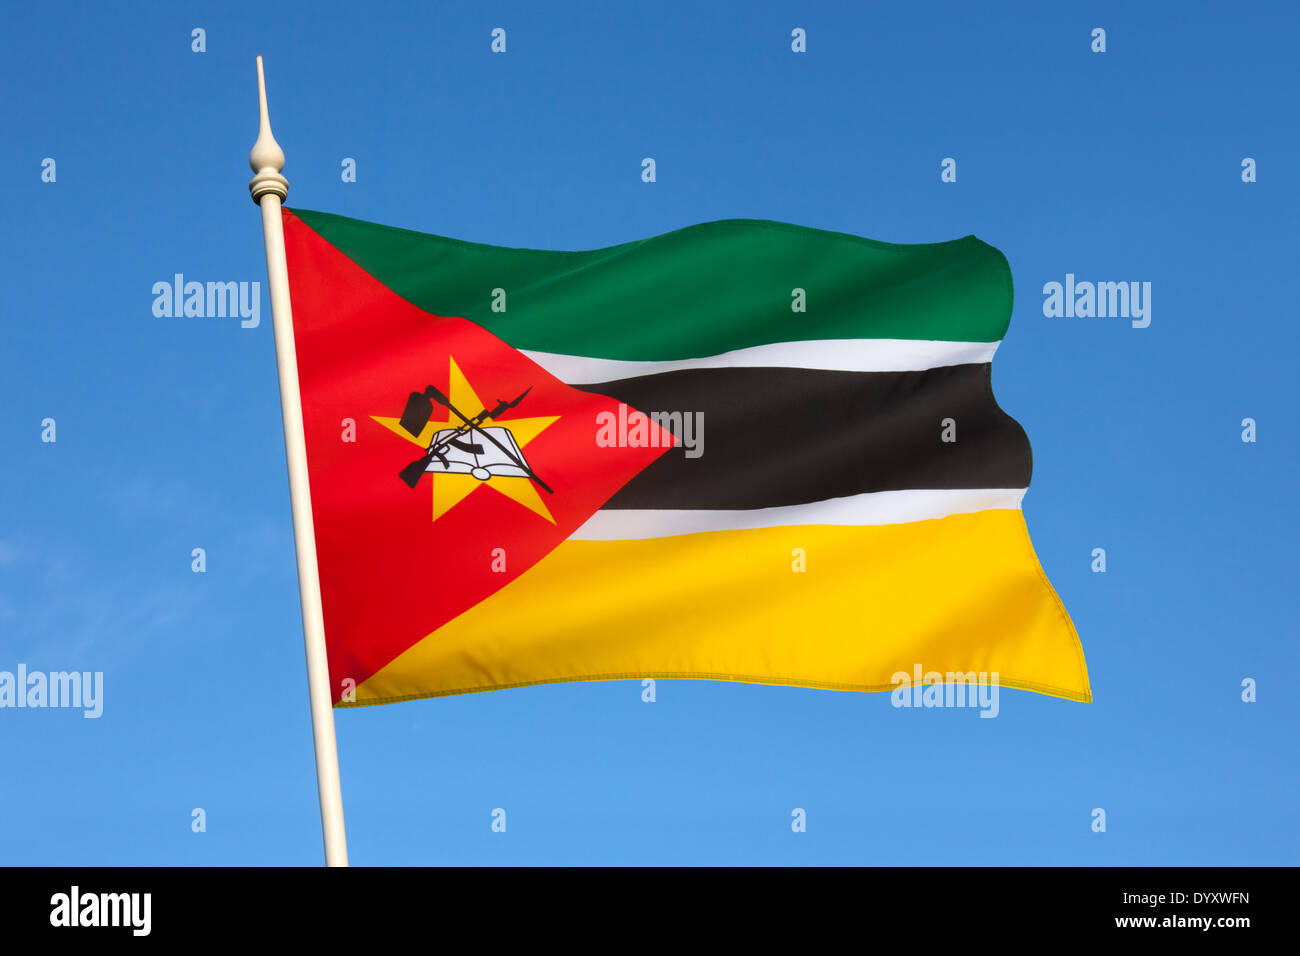 The flag of Mozambique Stock Photo